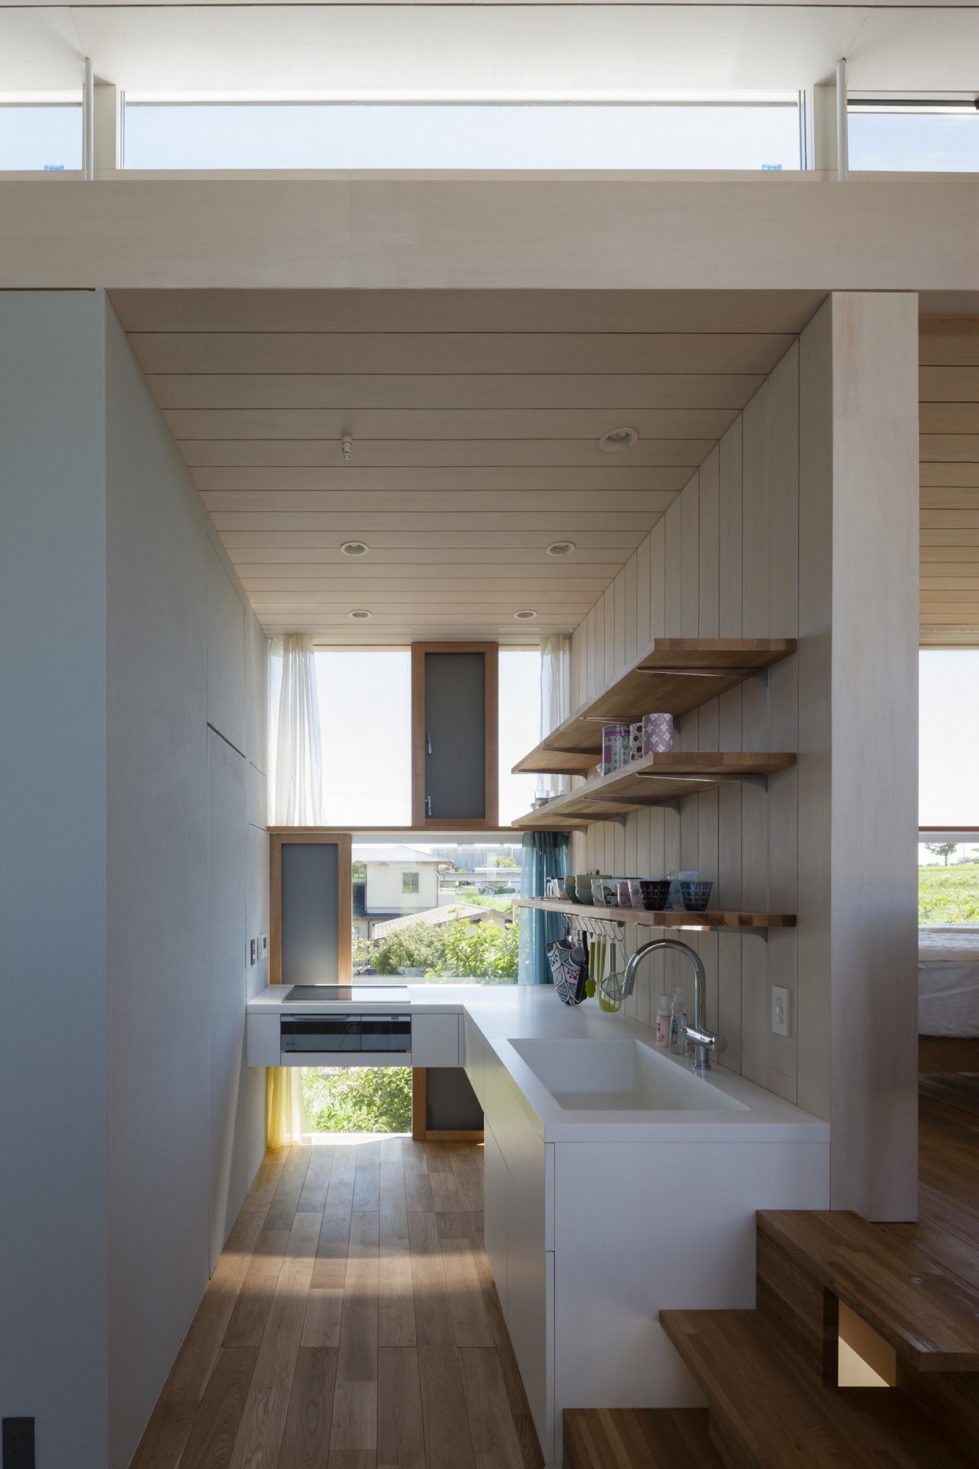 The family idyll in Japan from the Ihrmk studio 4